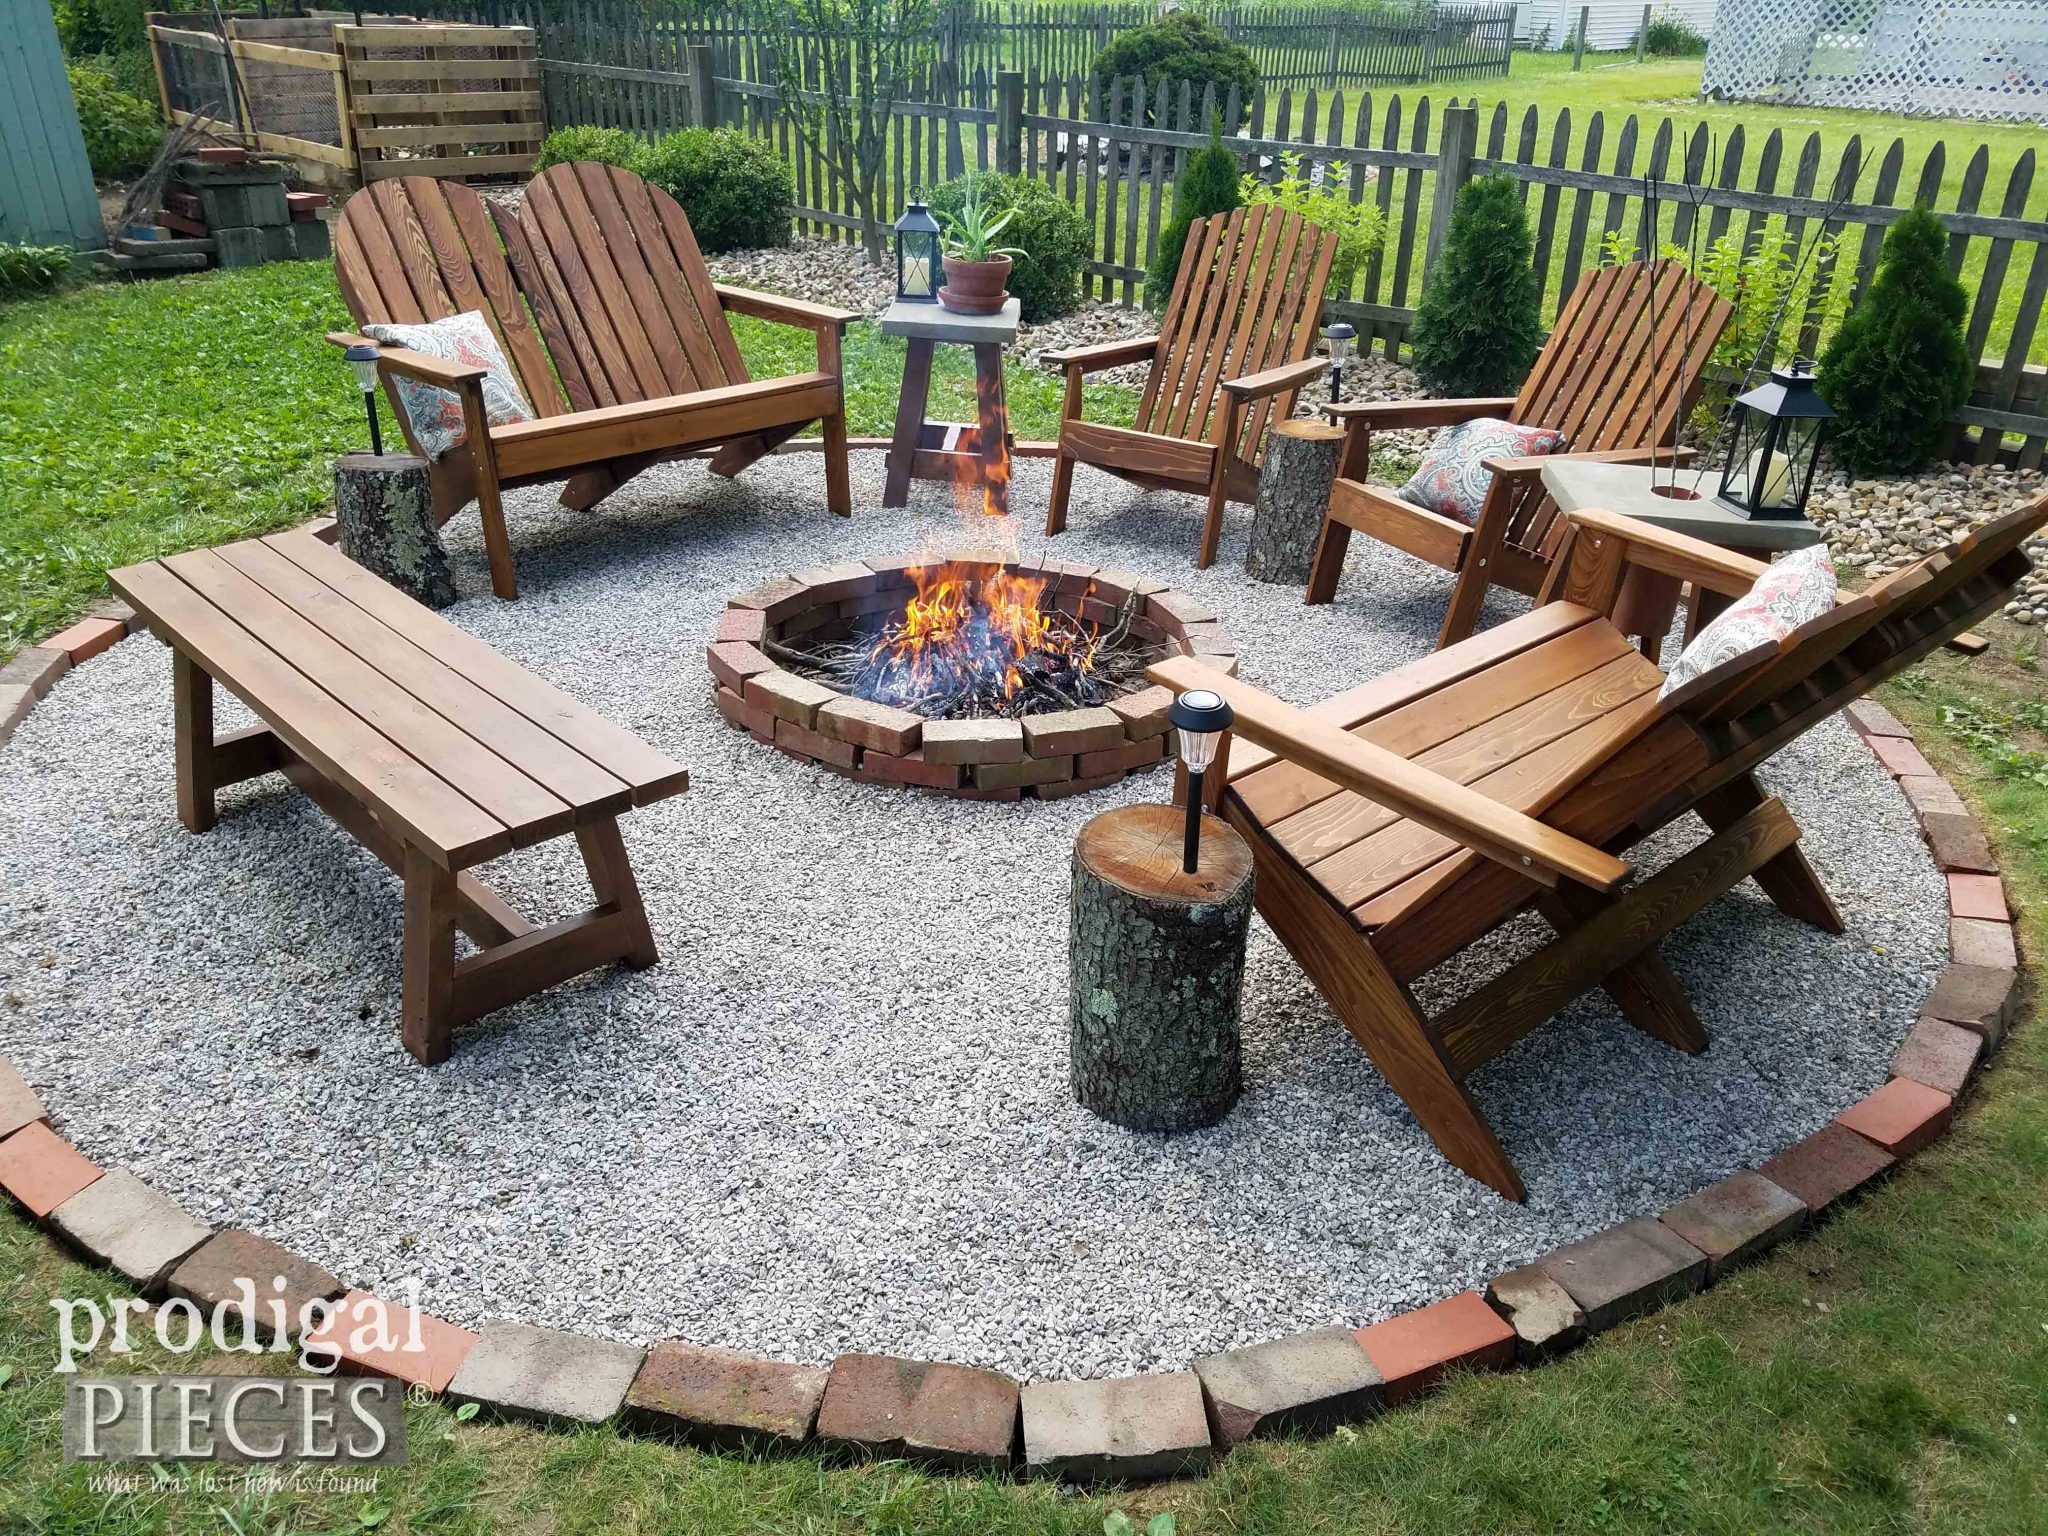 The amazing advantages of having an outdoor fire pit